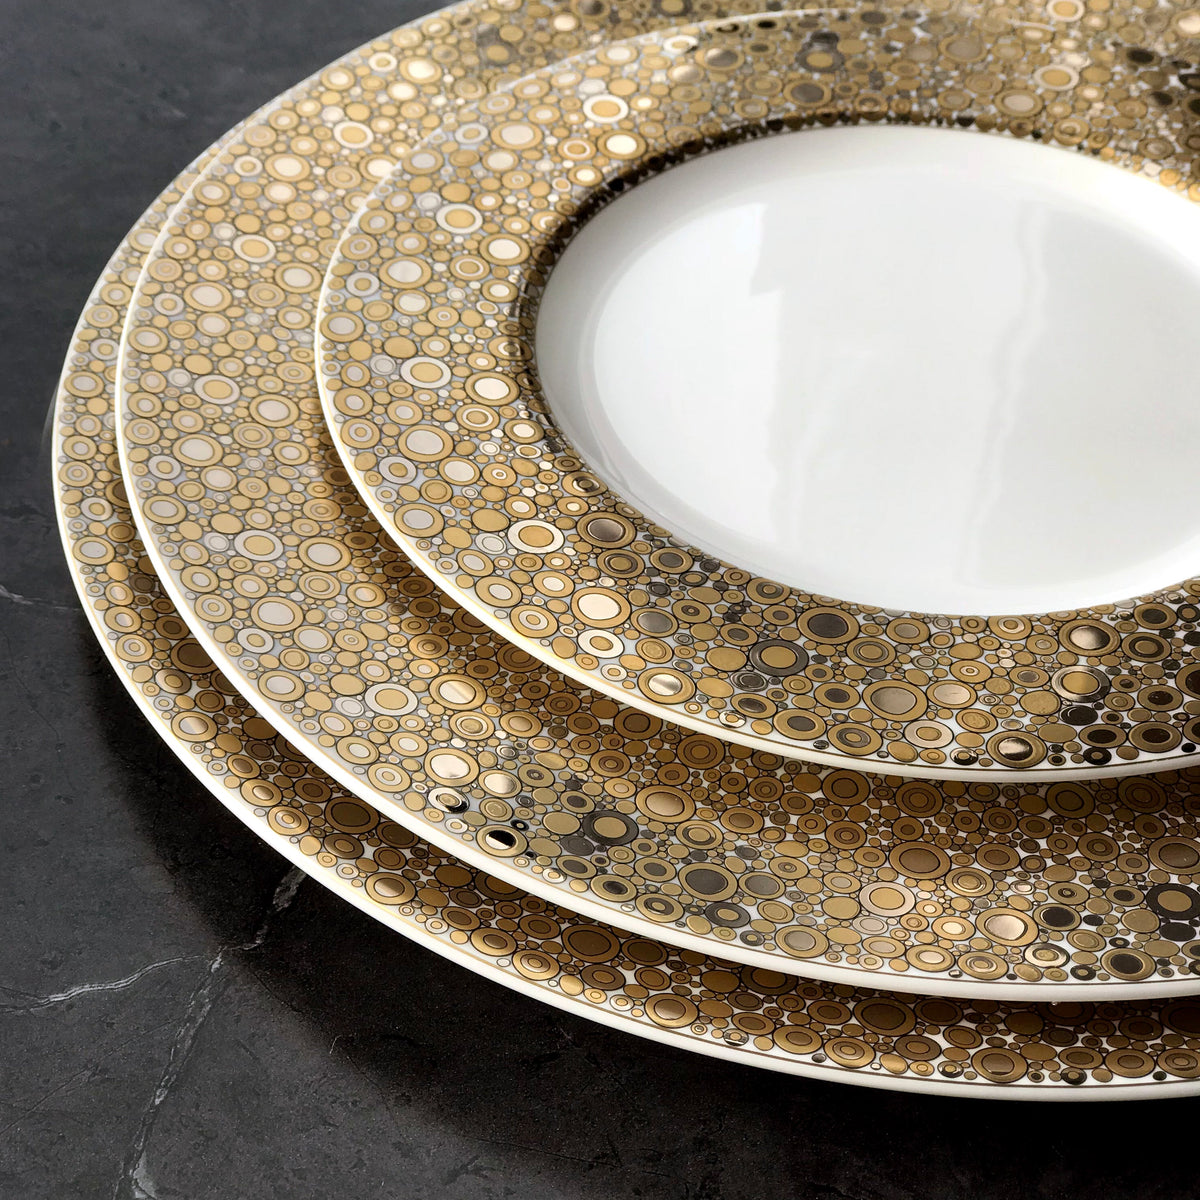 An elegant set of Ellington Shimmer Gold &amp; Platinum Salad Plates by Caskata Artisanal Home on a marble table, shimmering with the beauty of precious metals.